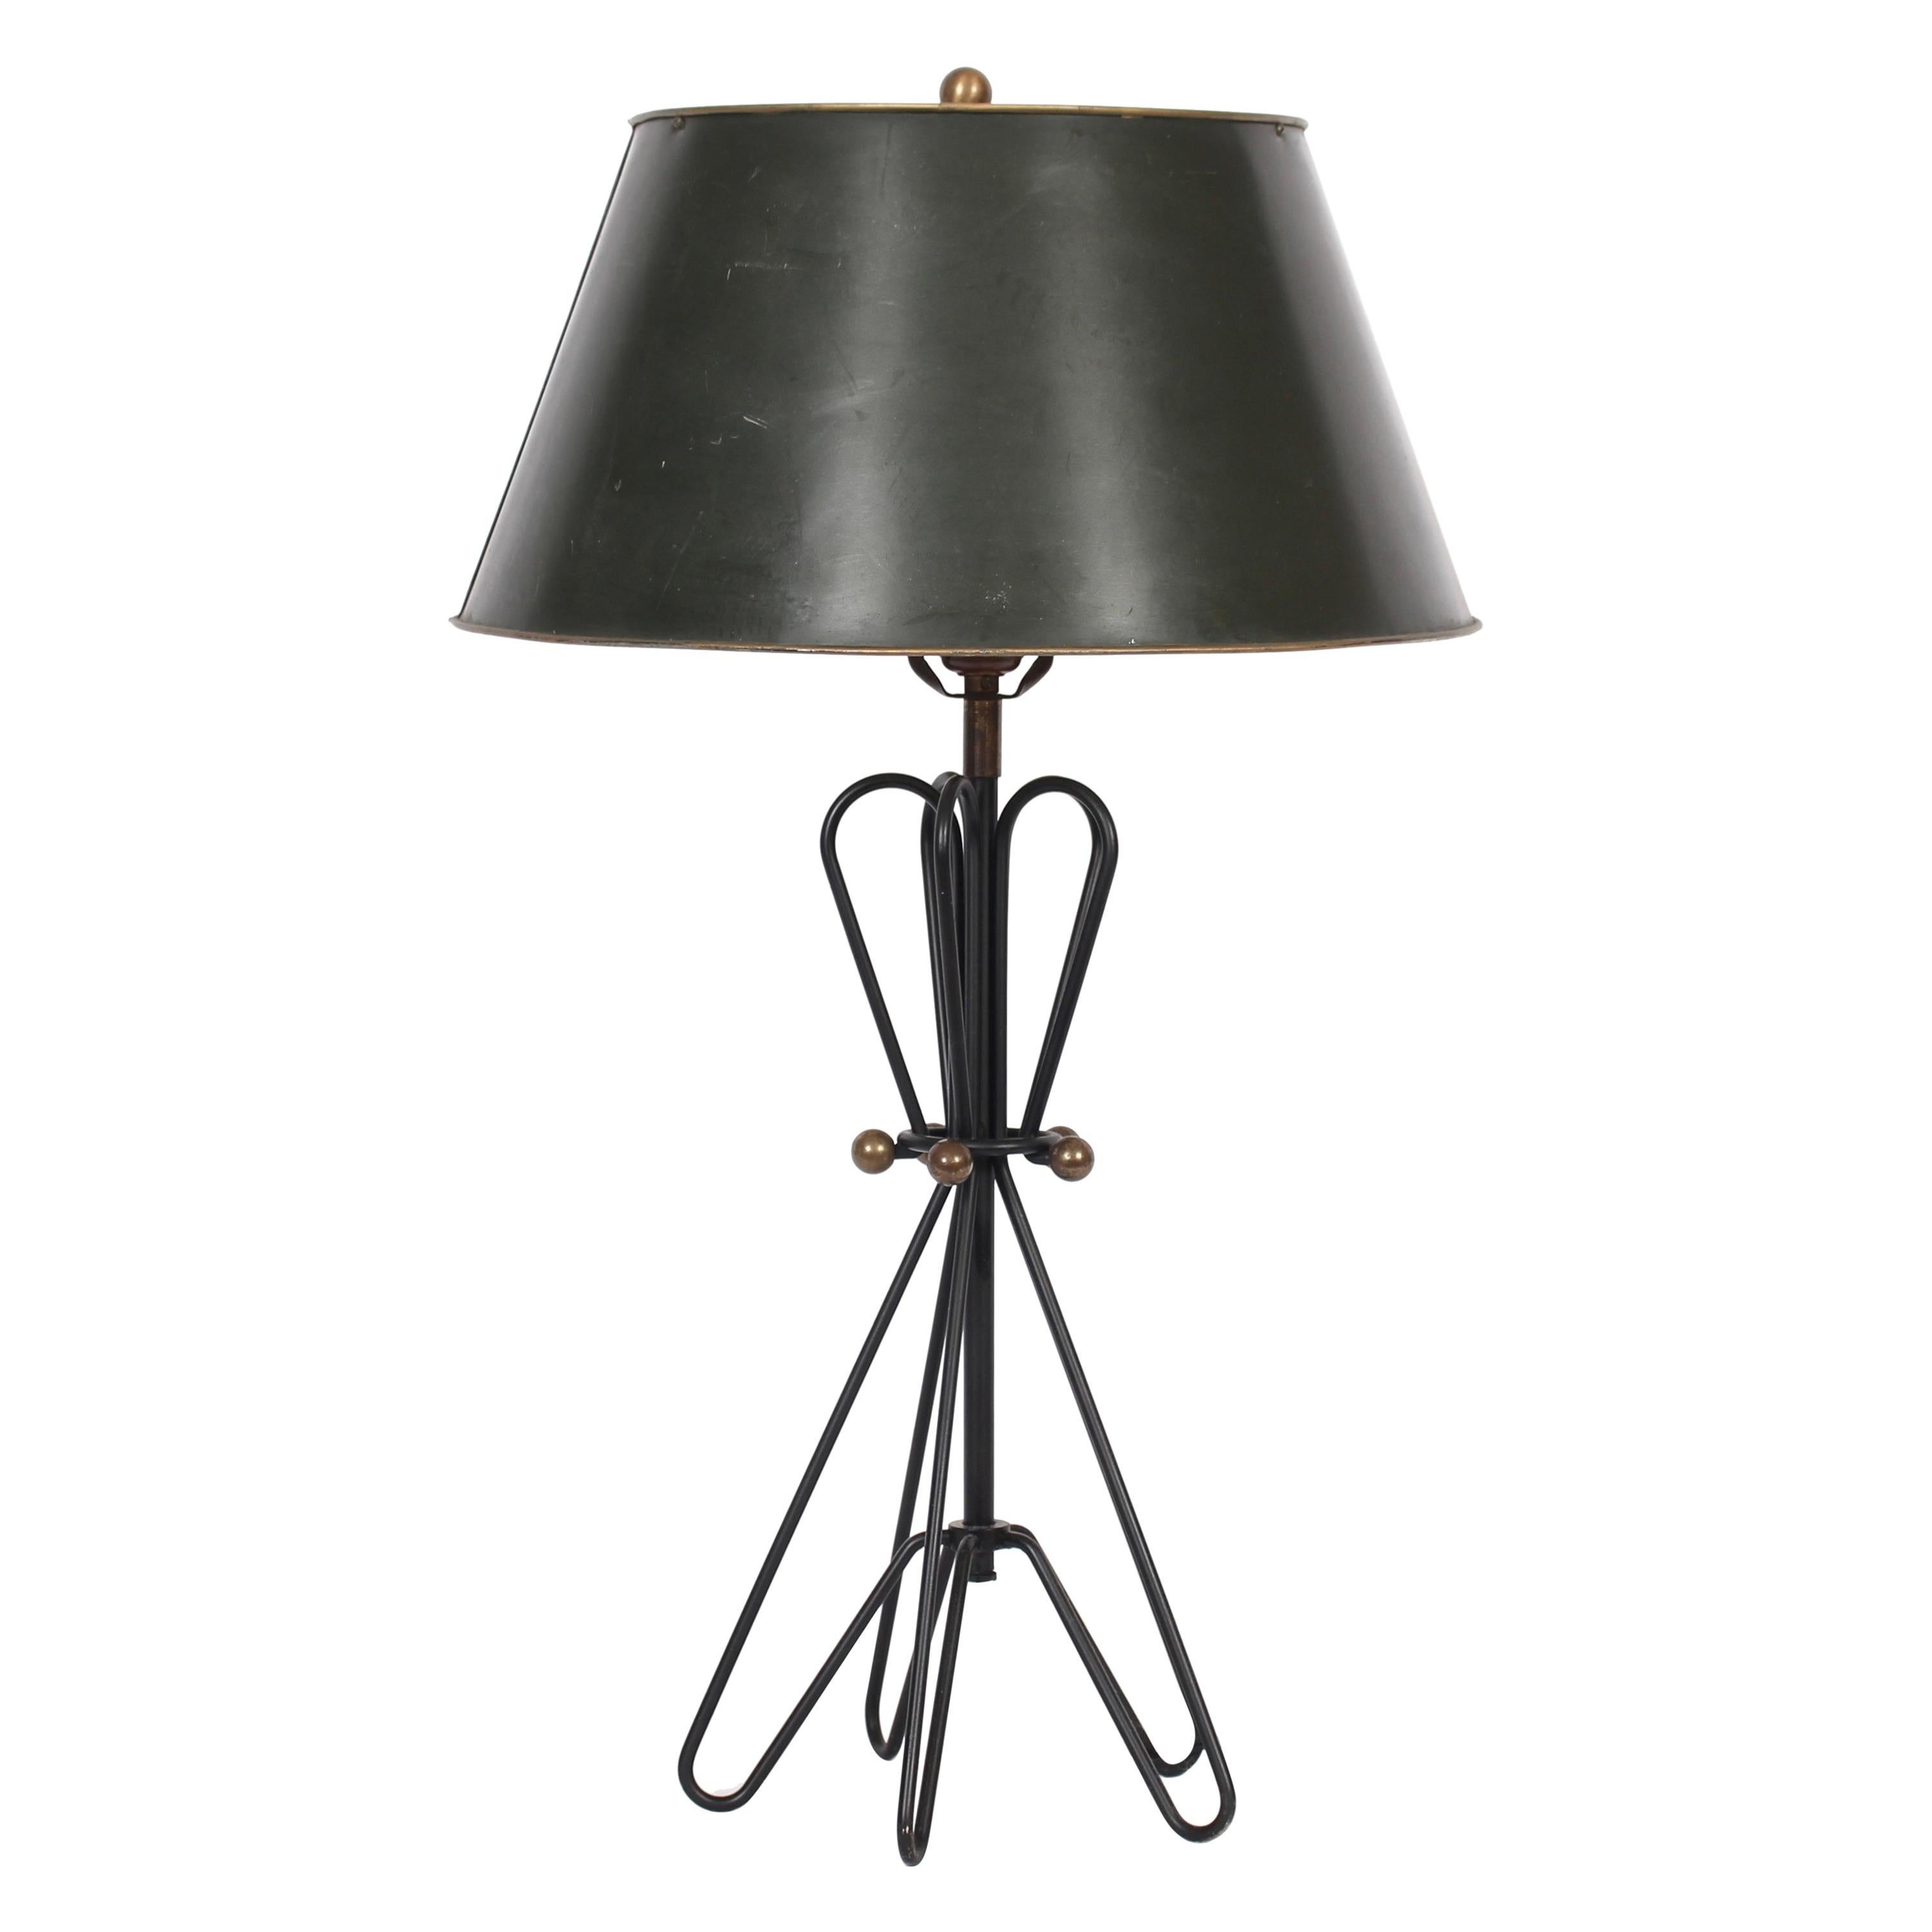 Verplex, Tony Paul Style Black Hairpin Table Lamp with Brass Ball Accents, 1950s